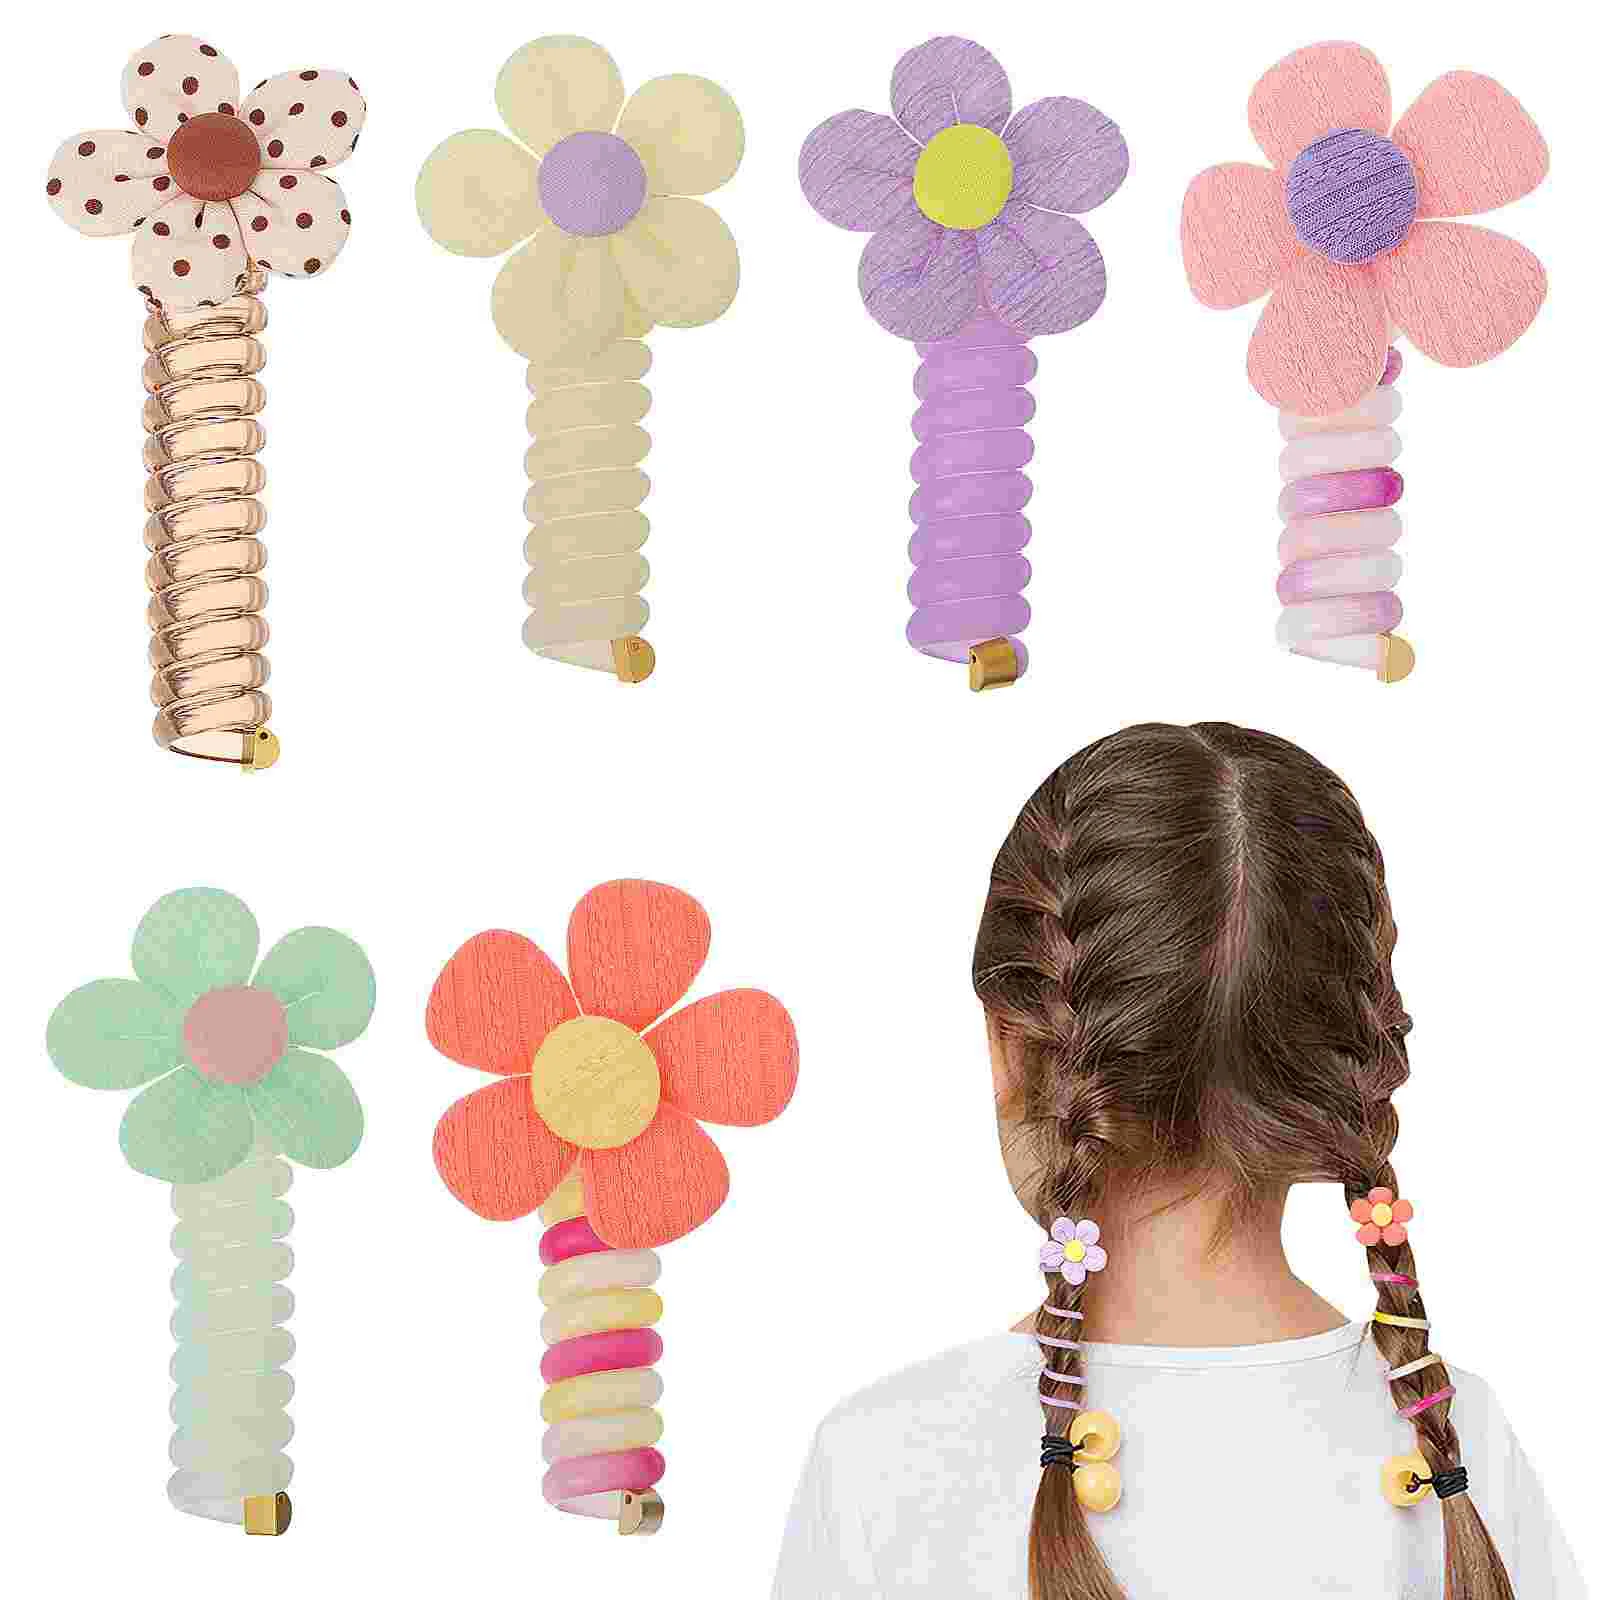 

Spiral Hair Ties Toddler Rubber Bands For Girls Elastics Cute Little Ponytail Holders Scrunchies Kids Telephone Line